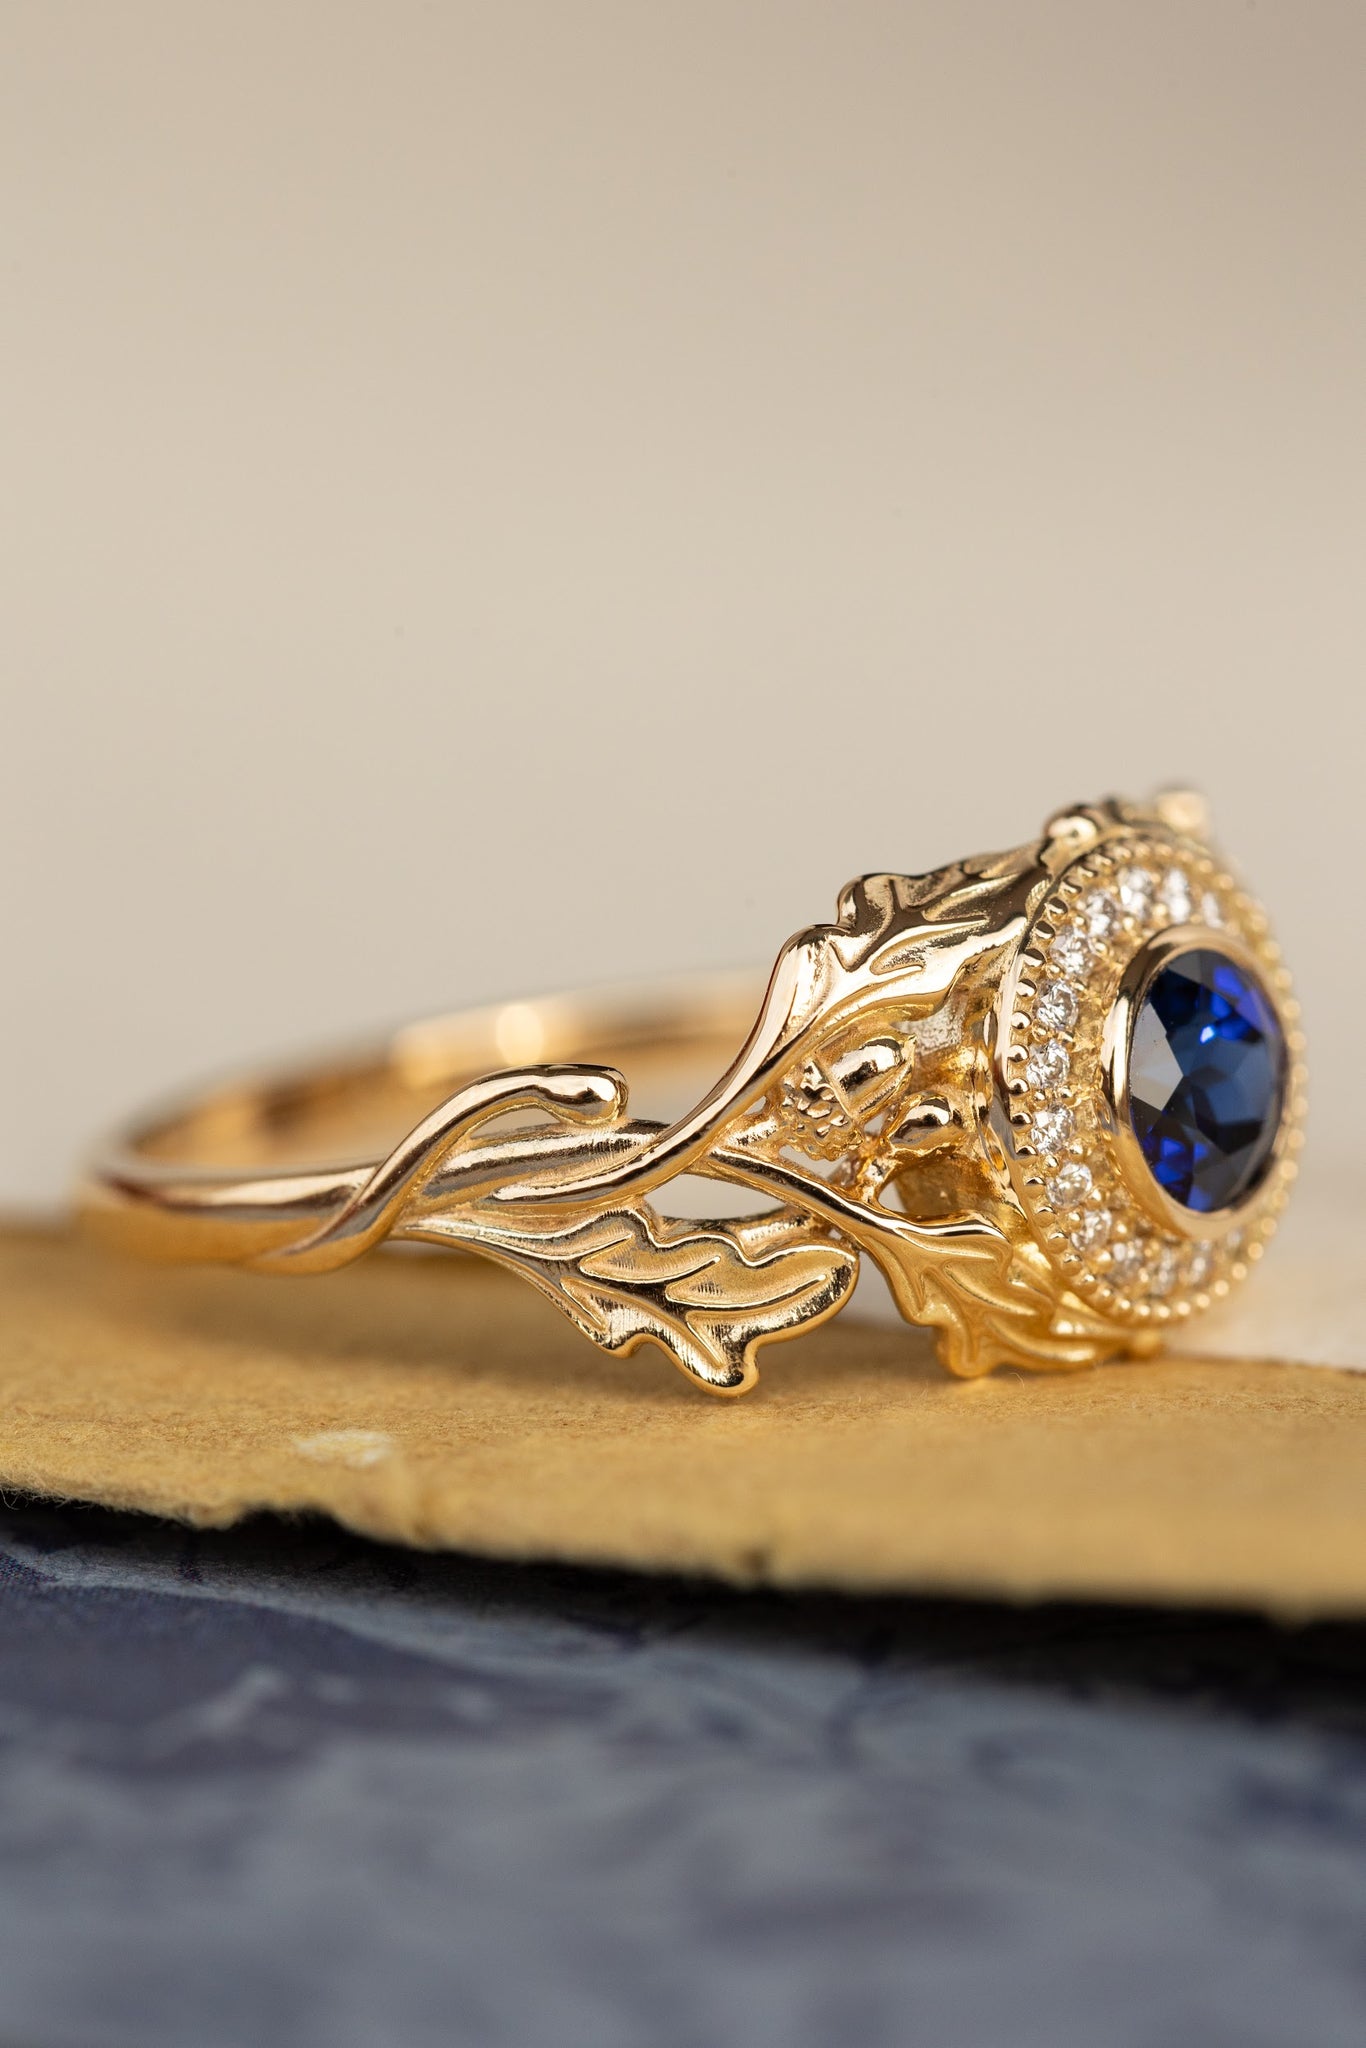 Halo diamond and lab blue sapphire engagement ring, celtic ring with oak leaves and diamonds / Dair - Eden Garden Jewelry™